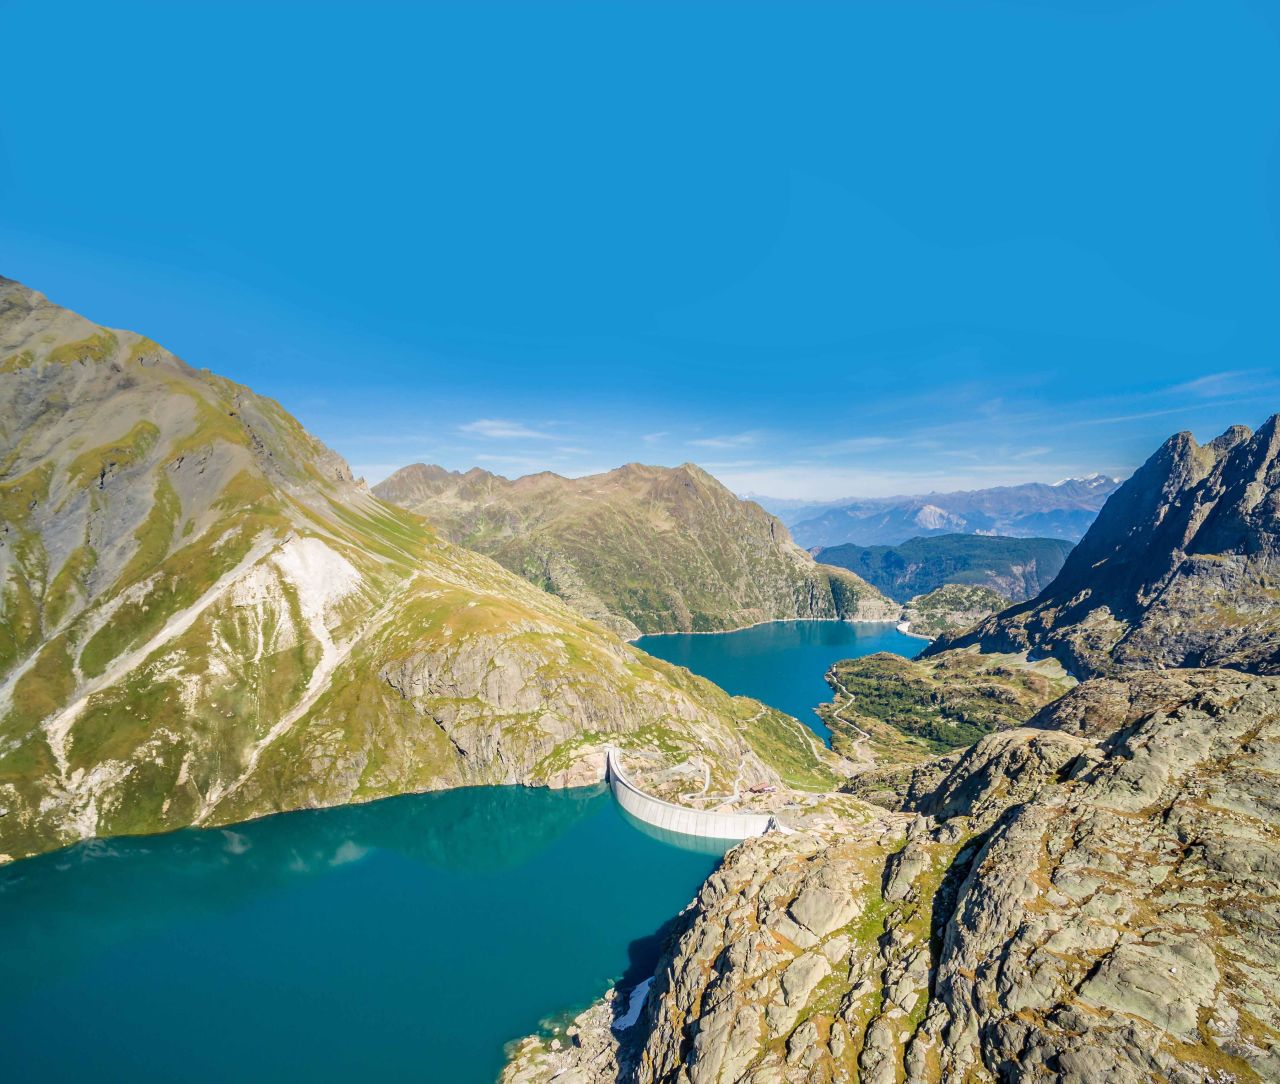 Located high in the Swiss Alps, Nant de Drance is a pumped storage hydropower plant that stores energy and generates electricity by moving water between higher and lower reservoirs. 